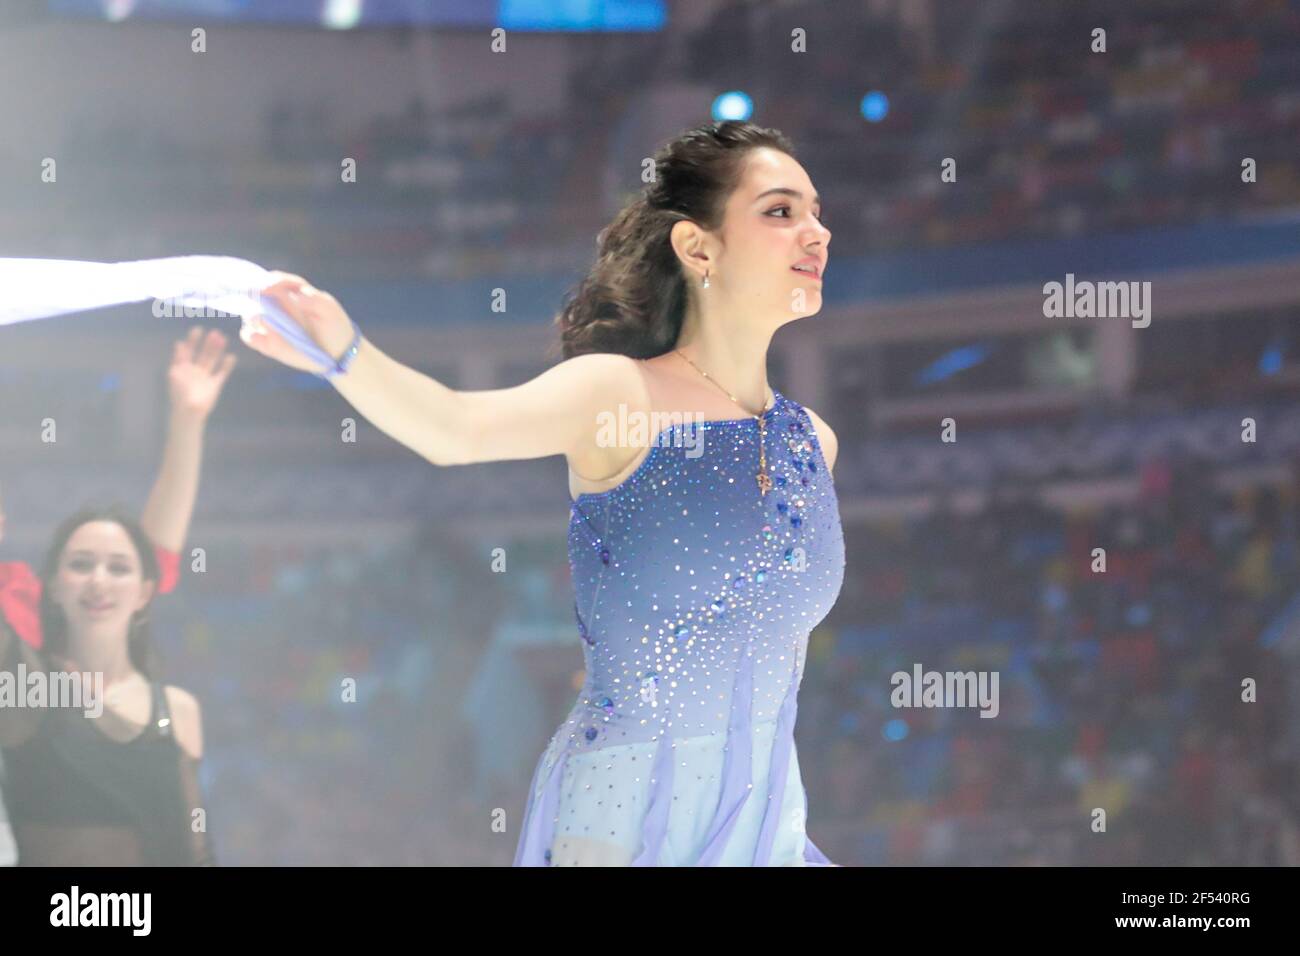 MOSCOW, RUSSIA - MARCH 7, 2021: Russian figure skaters perform in "Ice  Age", an ice skating gala show directed by Ilya Averbukh, at Megasport  Arena. The show features figure skaters, ice dancers